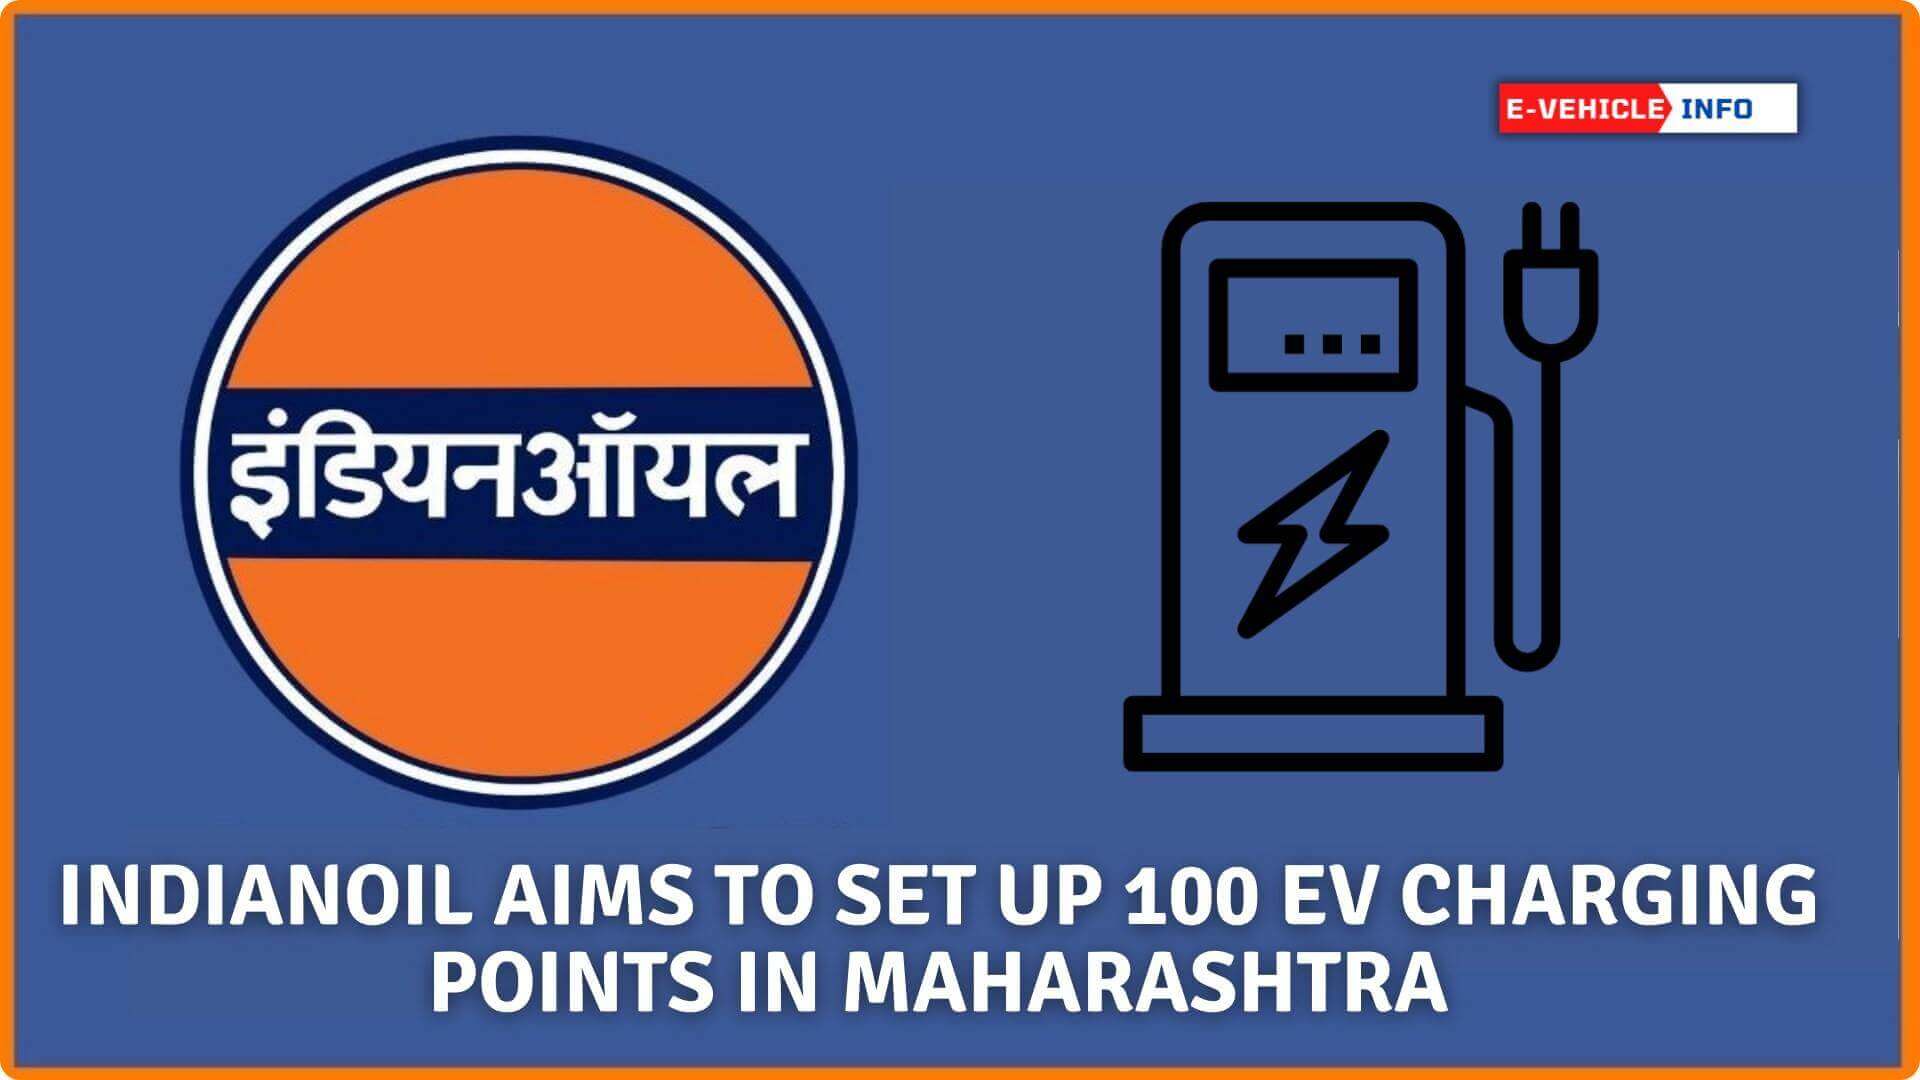 https://e-vehicleinfo.com/indian-oil-aims-to-set-up-100-ev-charging-points-in-maharashtra/